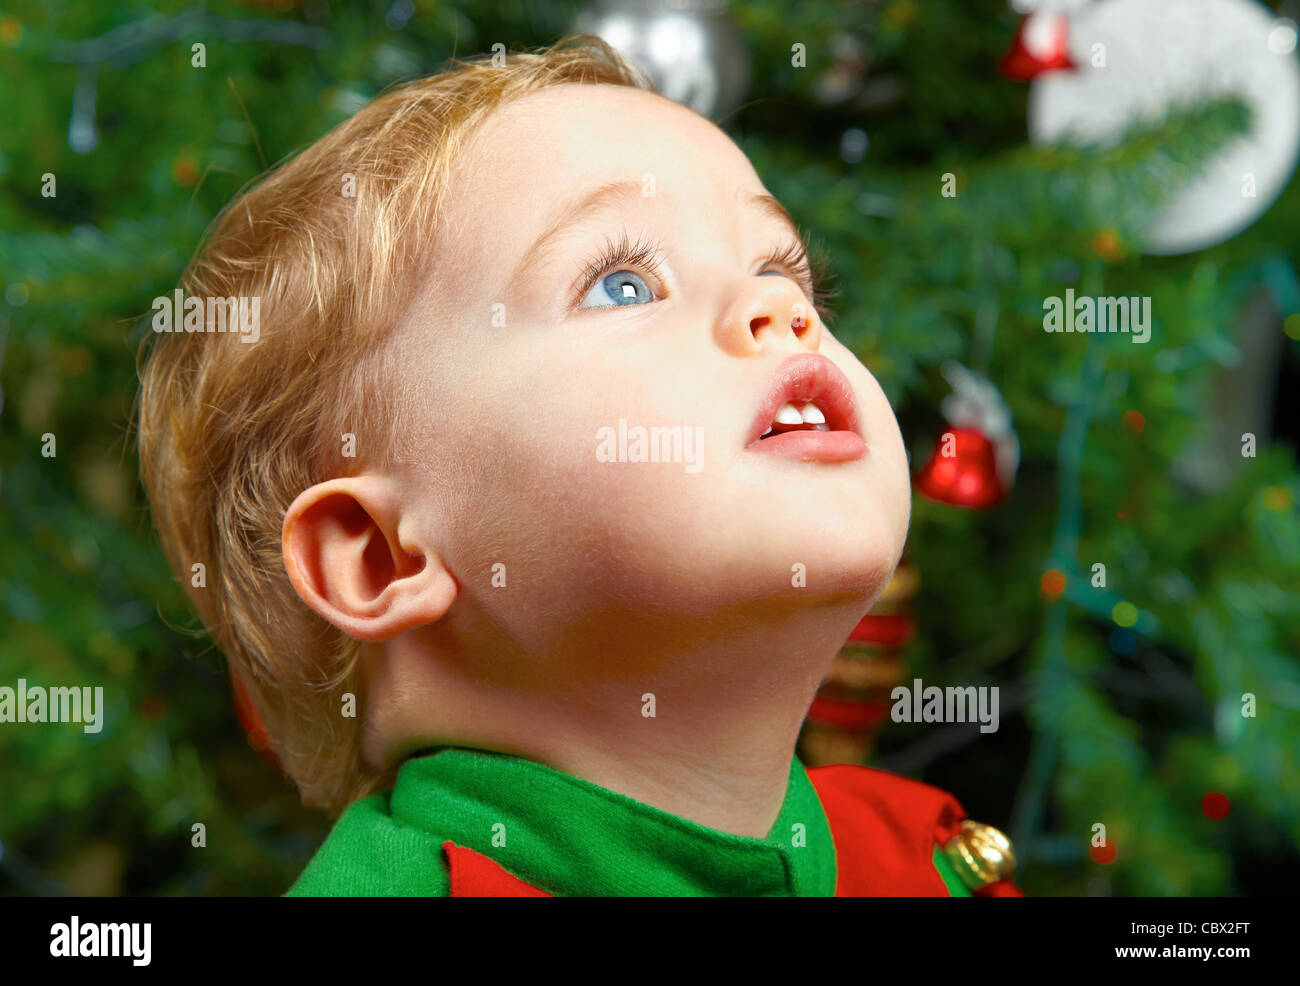 Cute 1 year old baby boy at the Christmas tree. Stock Photo